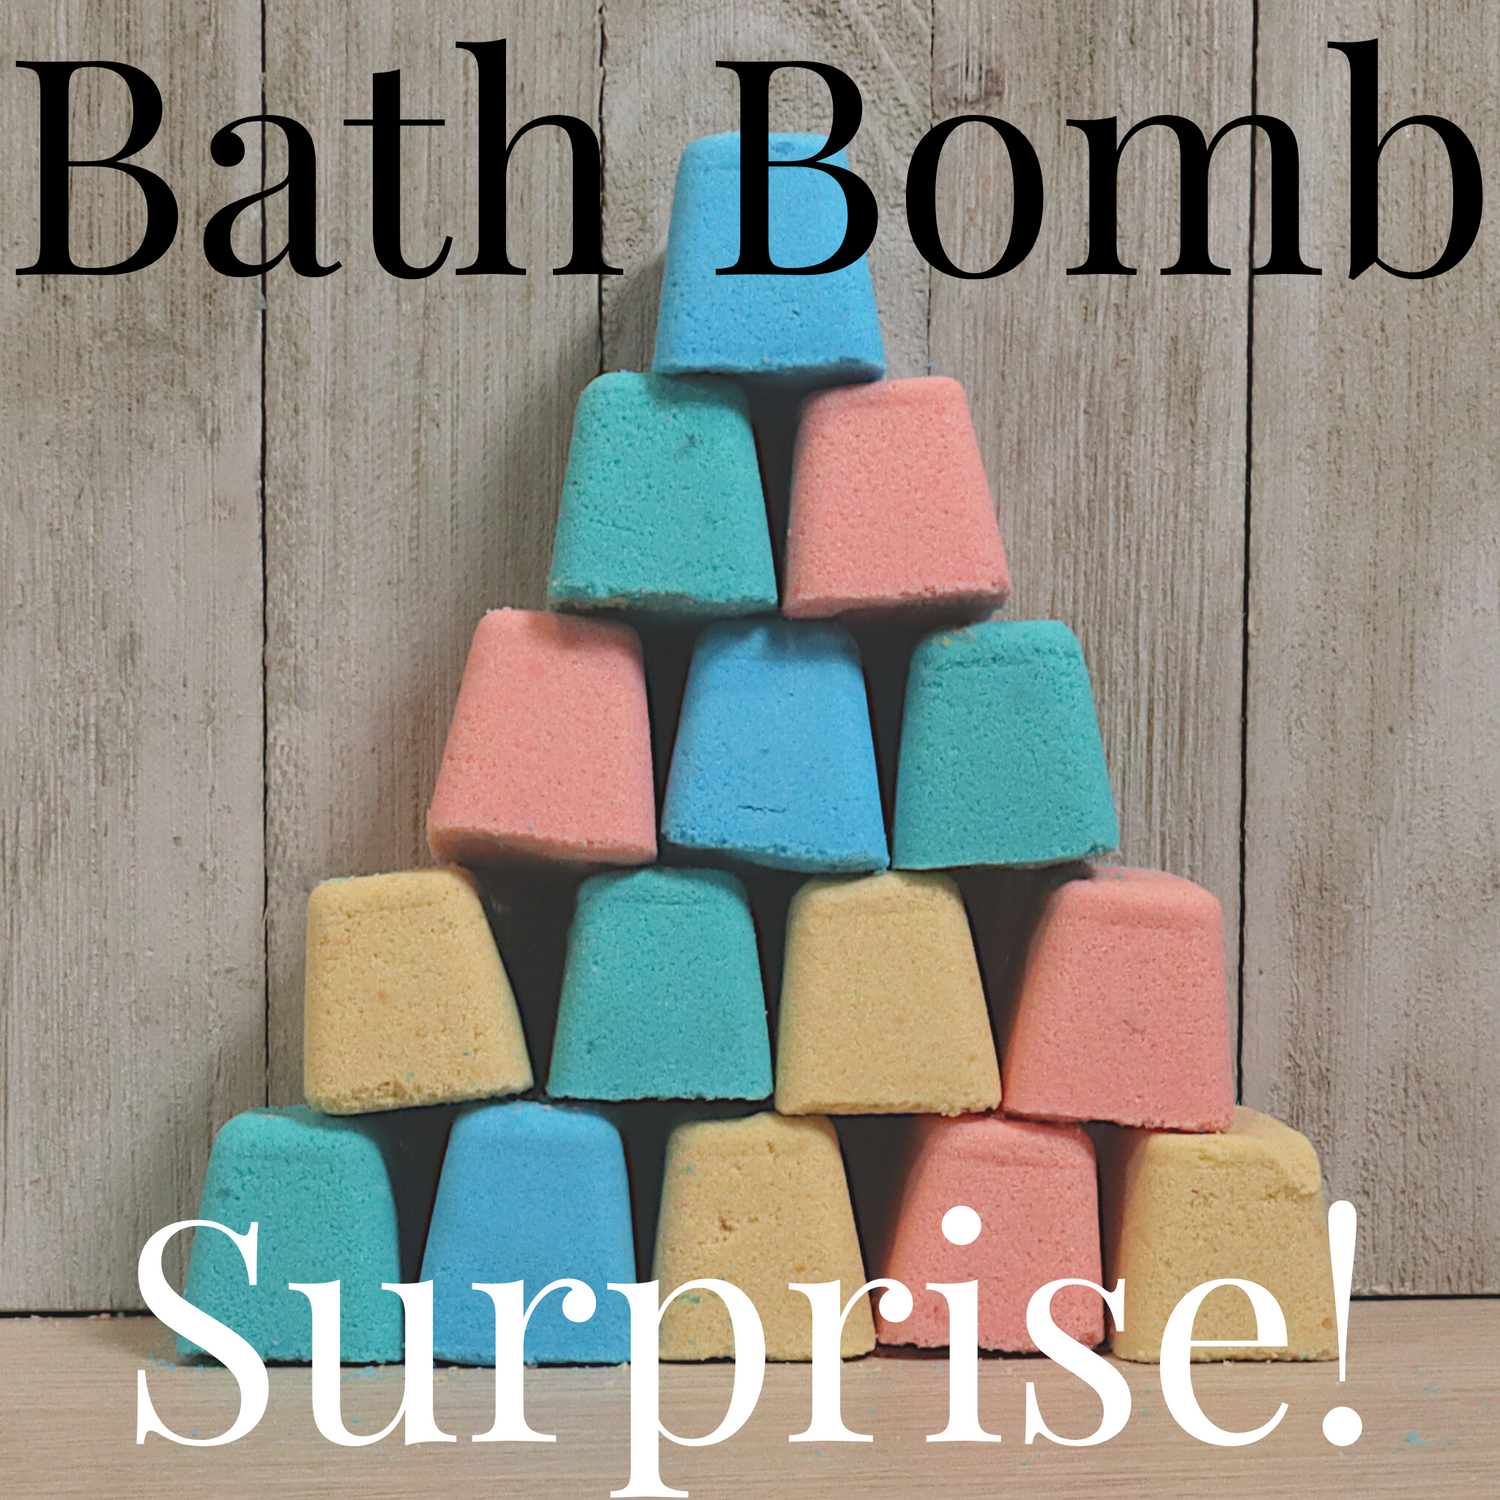 a pyramid stack of small bath bombs in all different colors. Bath bomb surprise is written across the image 